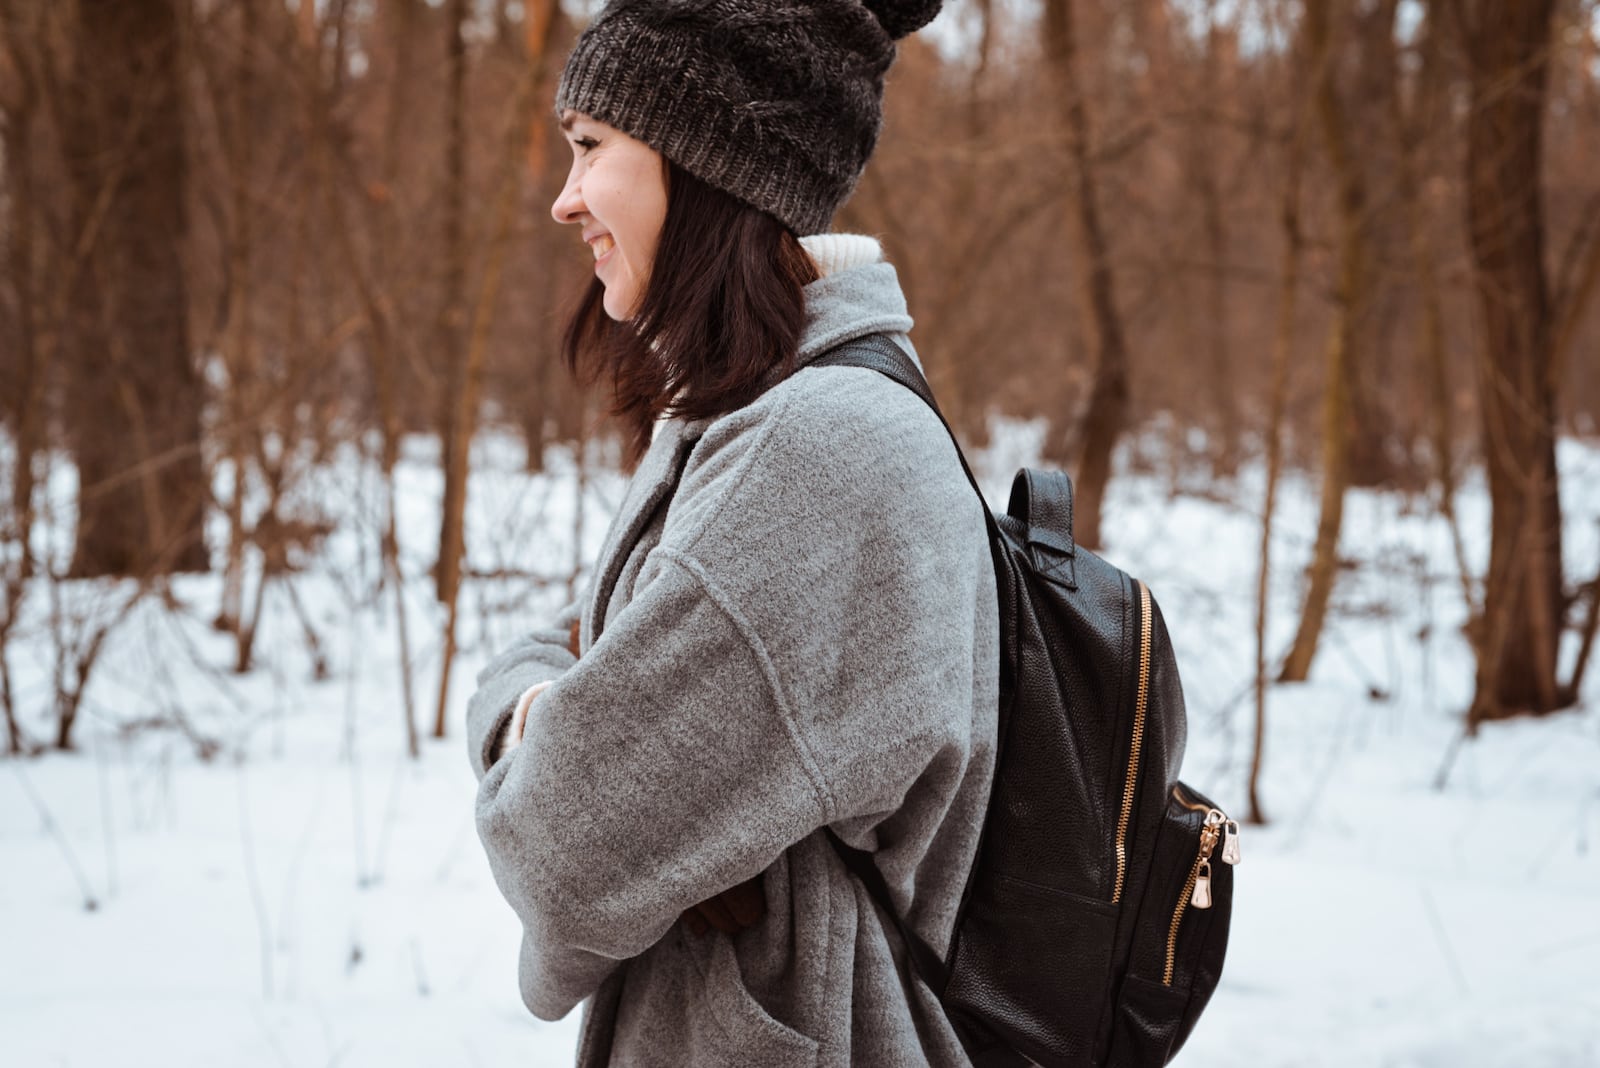 Portrait of a smiling girl with brown hair in winter forest wearing a leather backpack